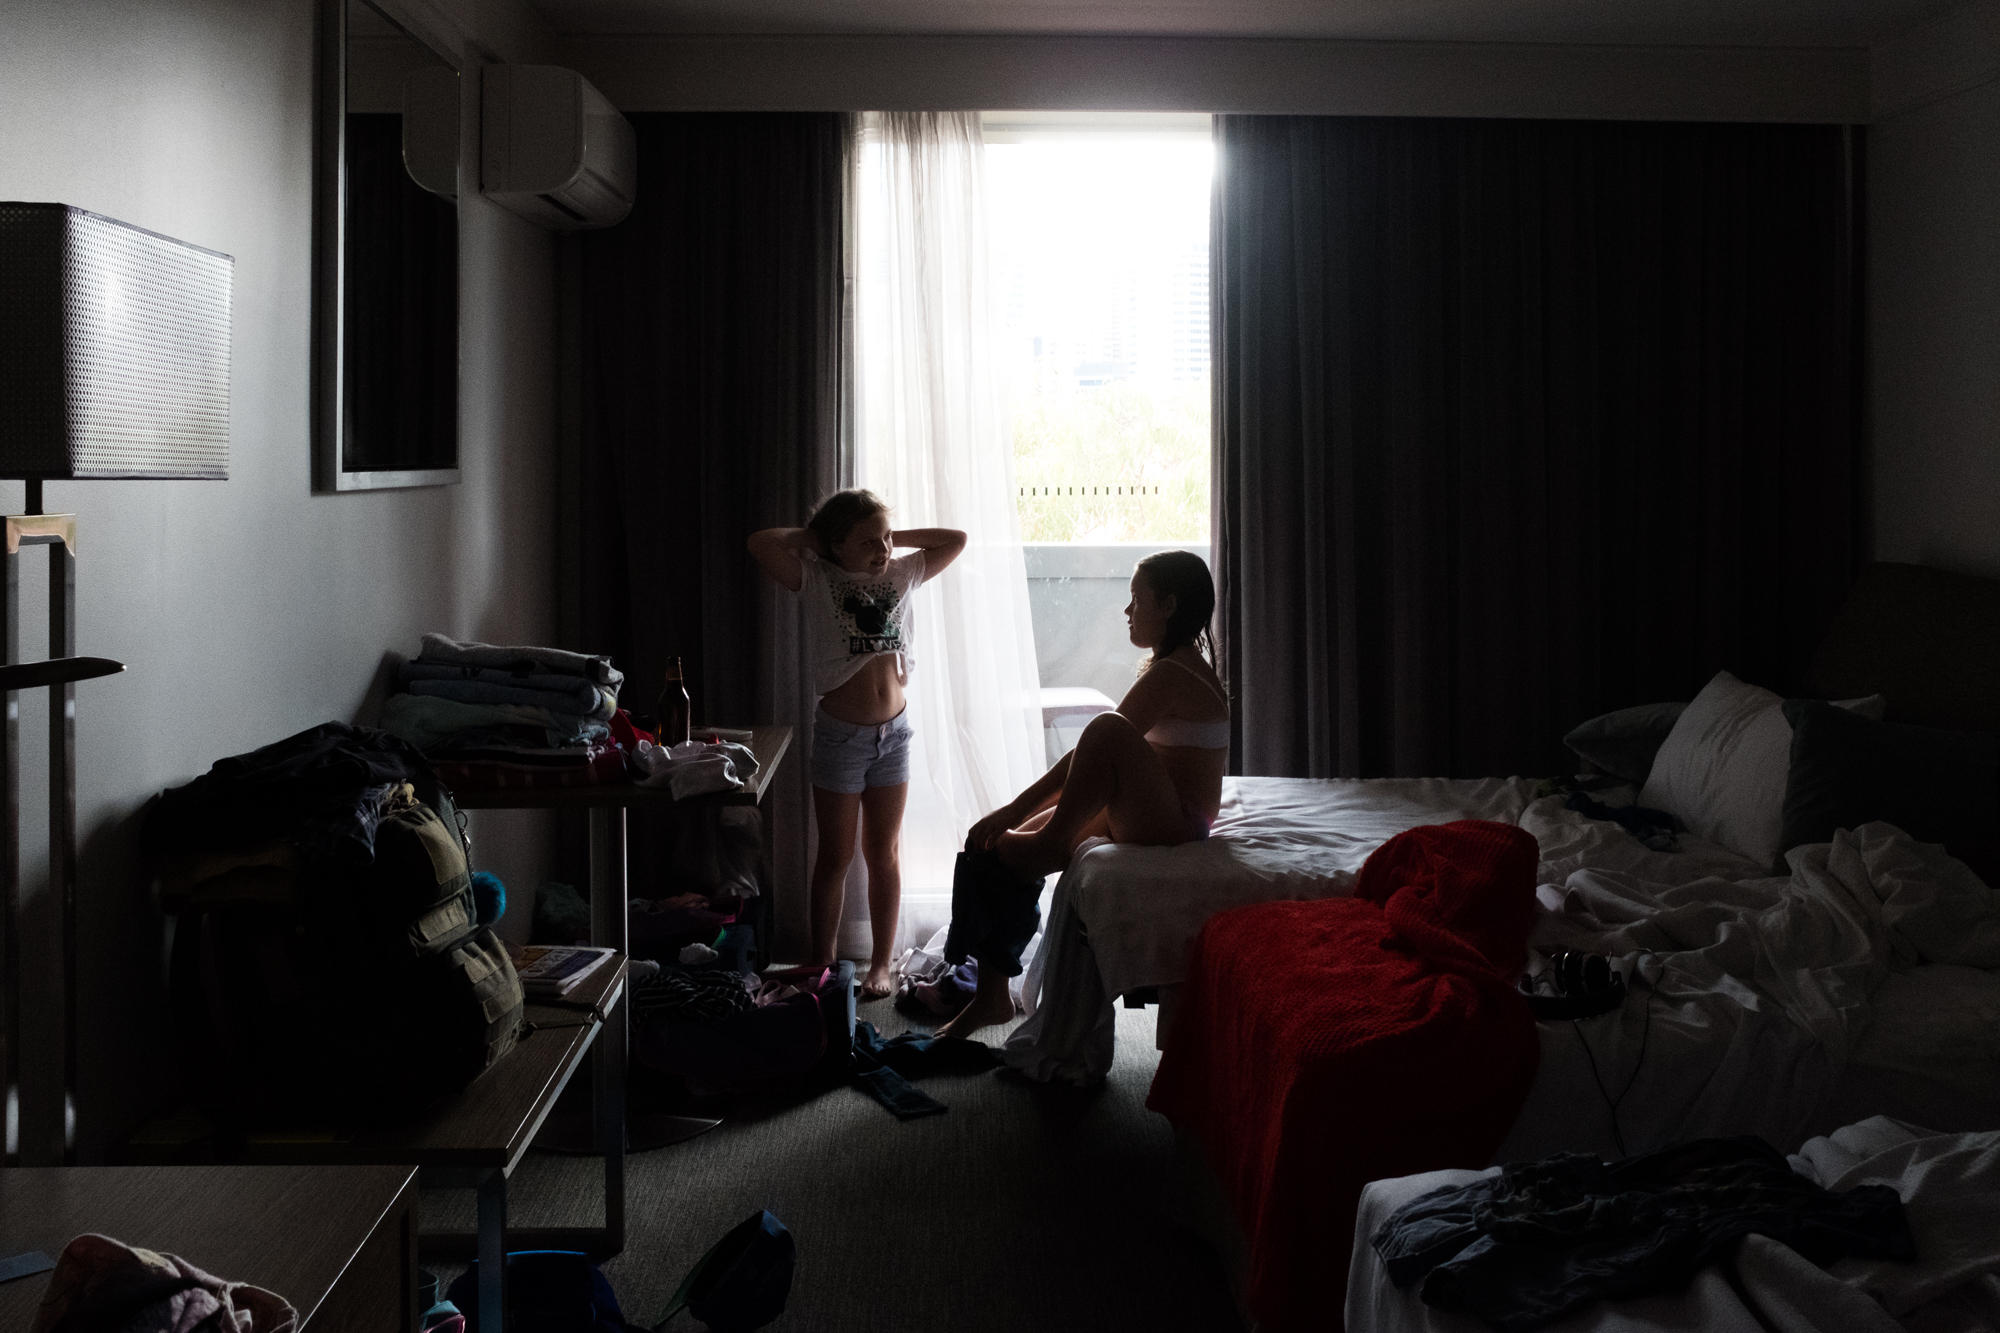 kids at hotel room window -documentary family photography